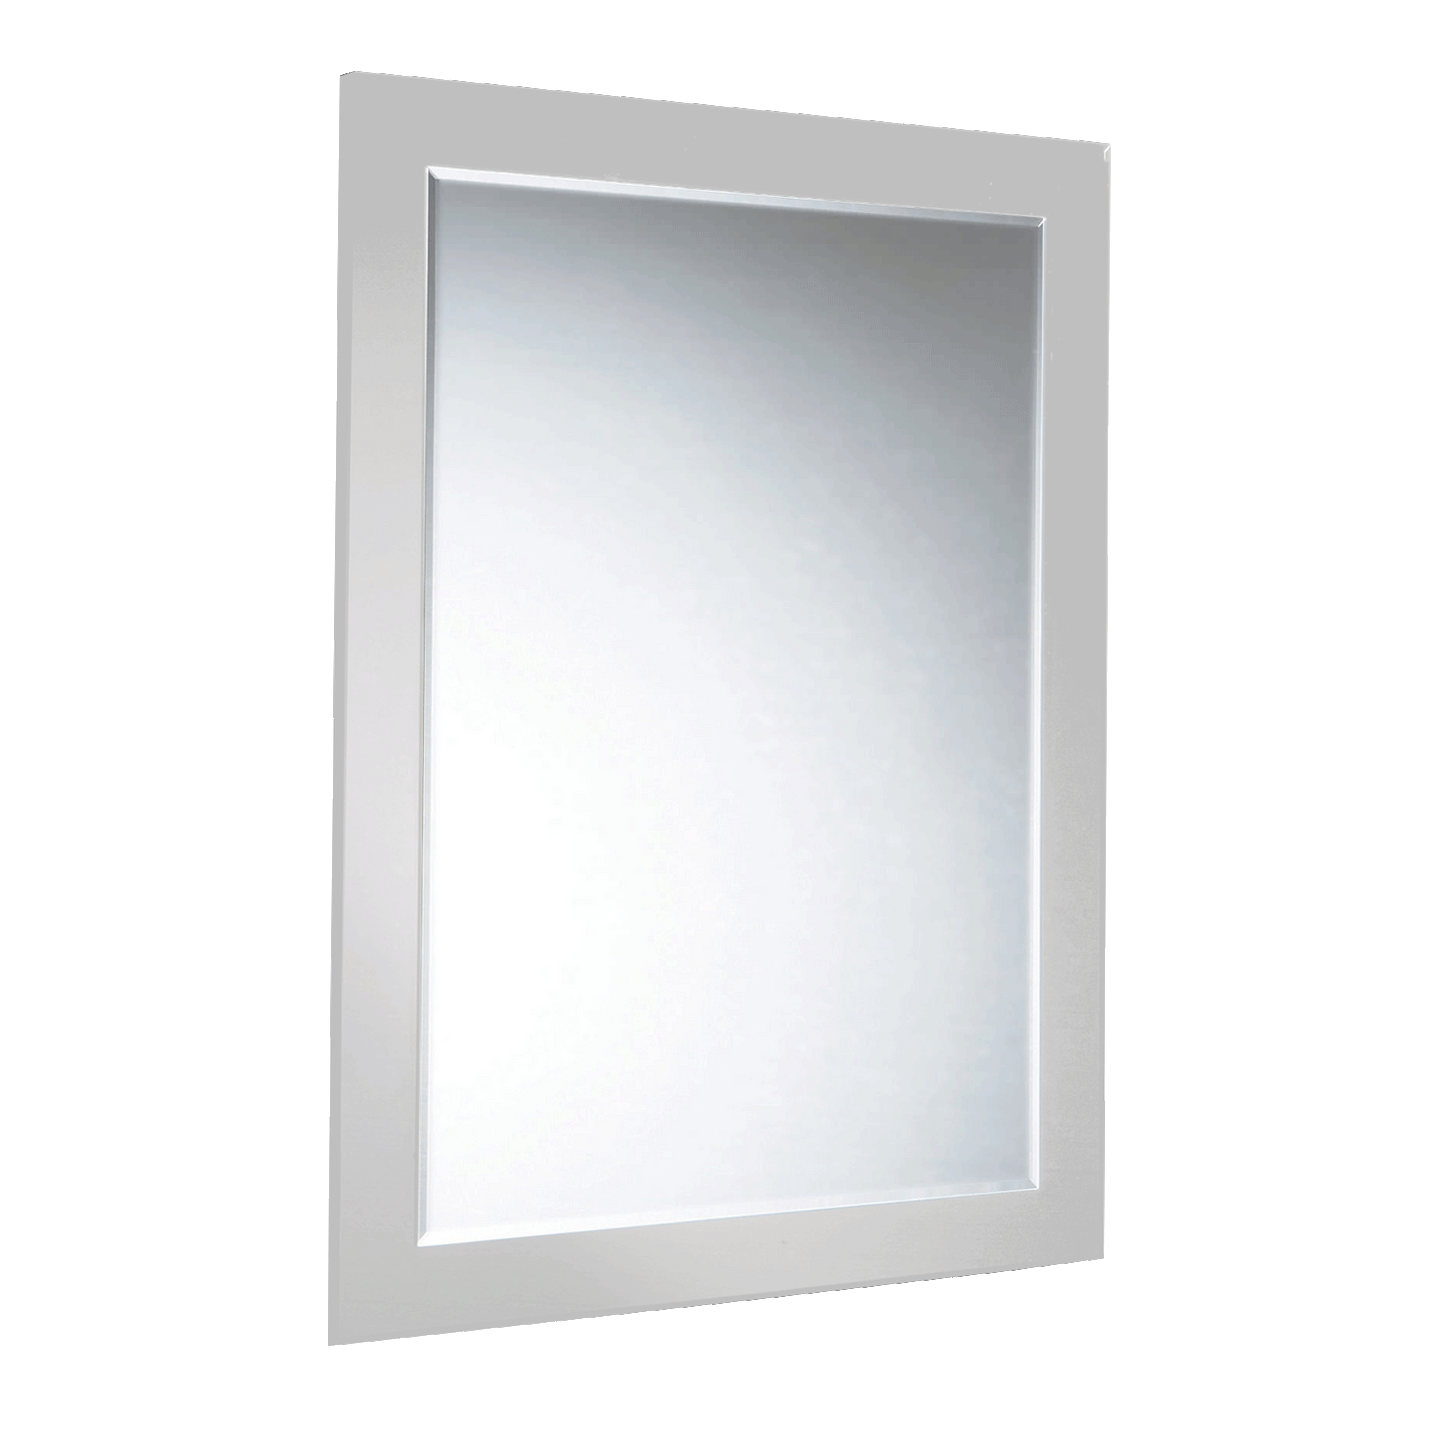 Rectangle Bathroom Mirror on Mirror with a White Edge 1200 x 900mm